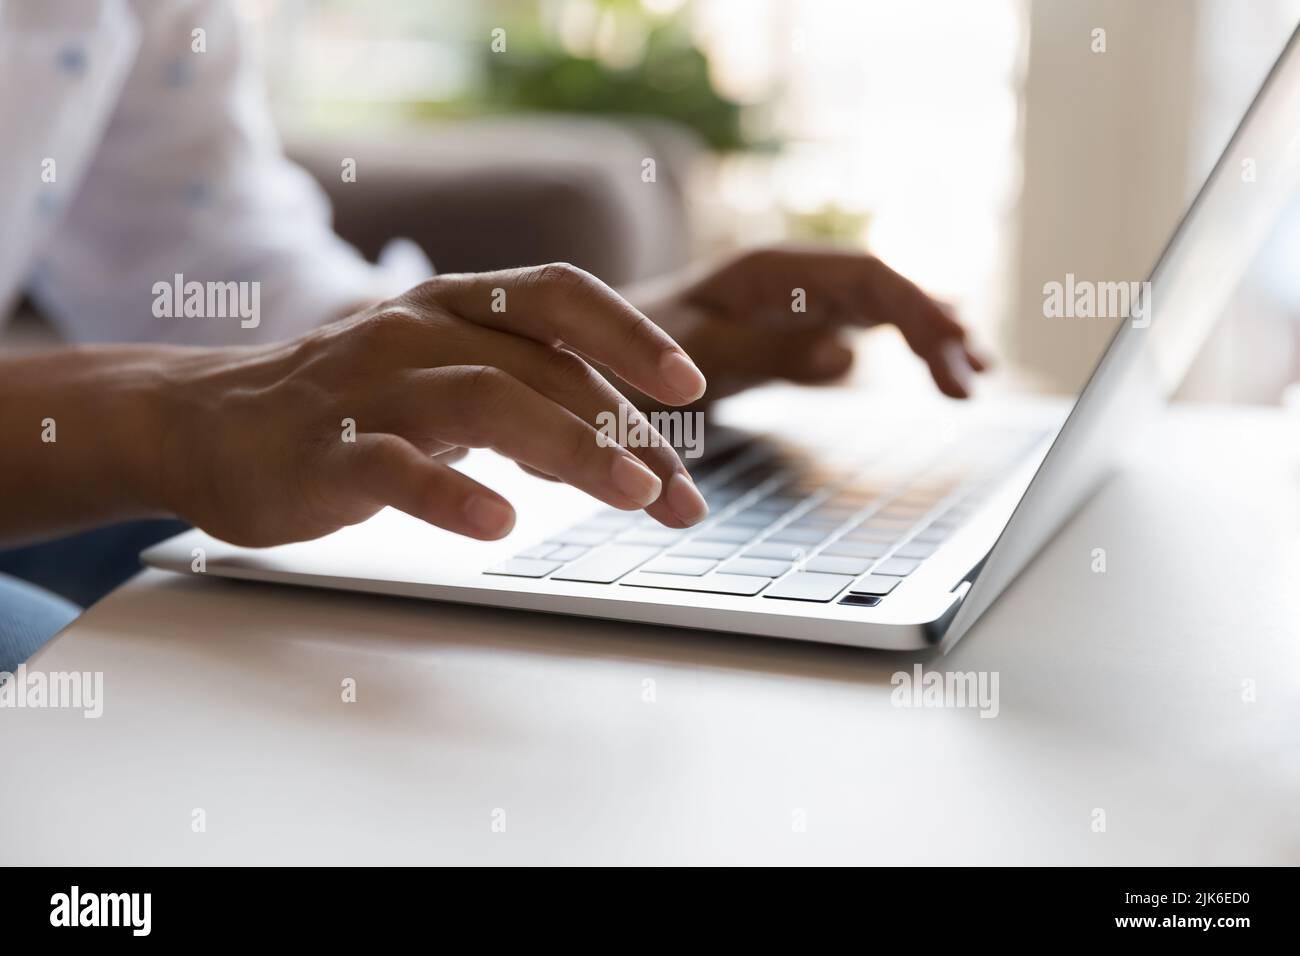 Young laptop user woman using computer, typing on keyboard Stock Photo